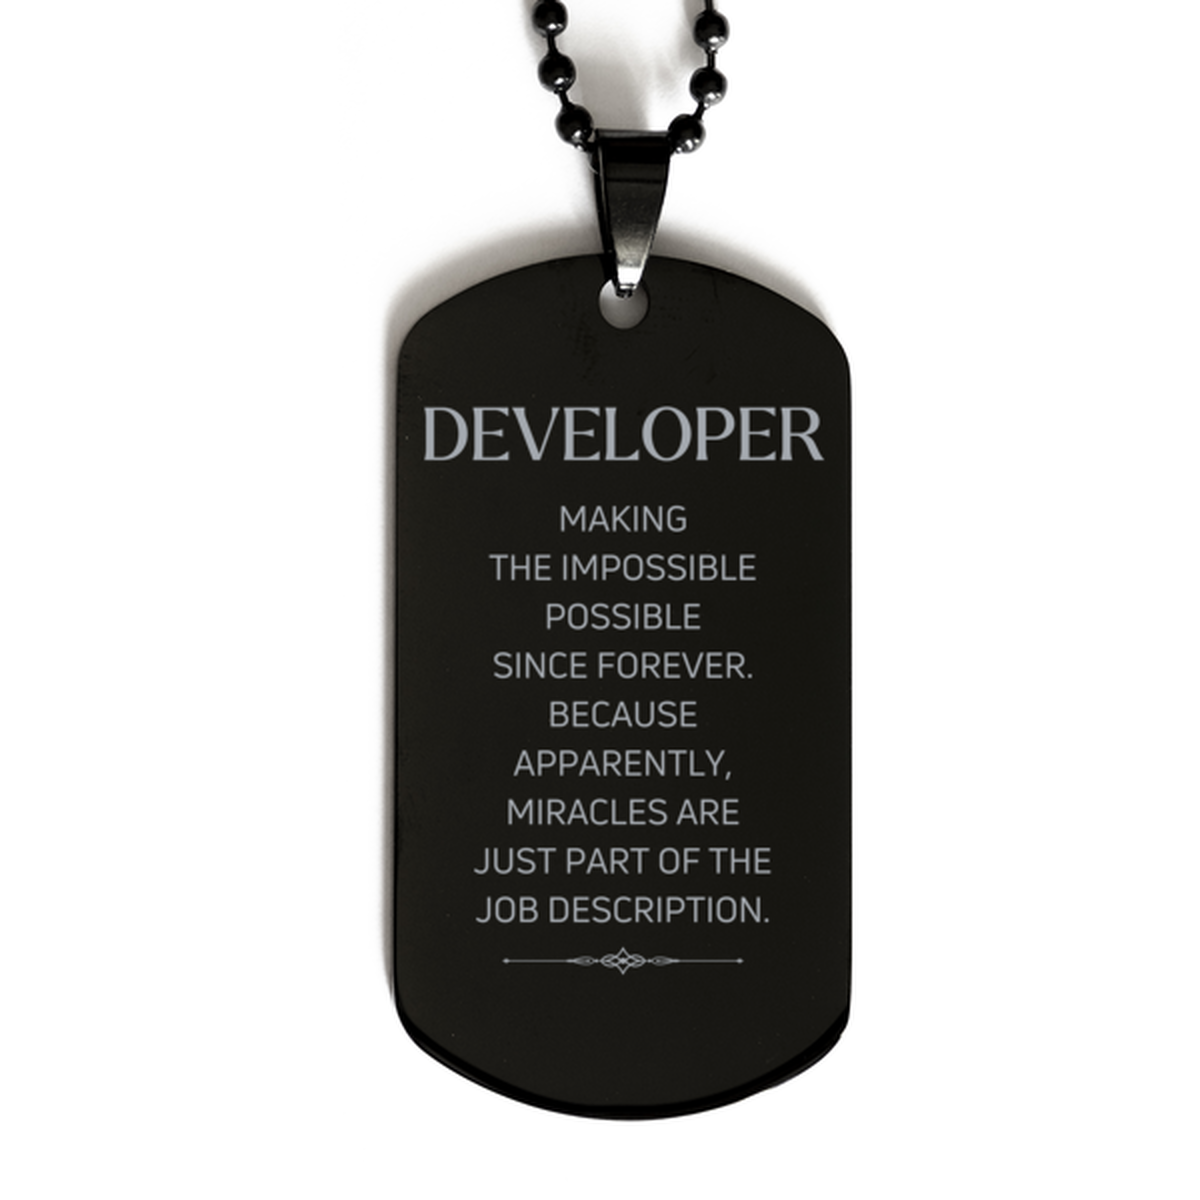 Funny Developer Gifts, Miracles are just part of the job description, Inspirational Birthday Black Dog Tag For Developer, Men, Women, Coworkers, Friends, Boss